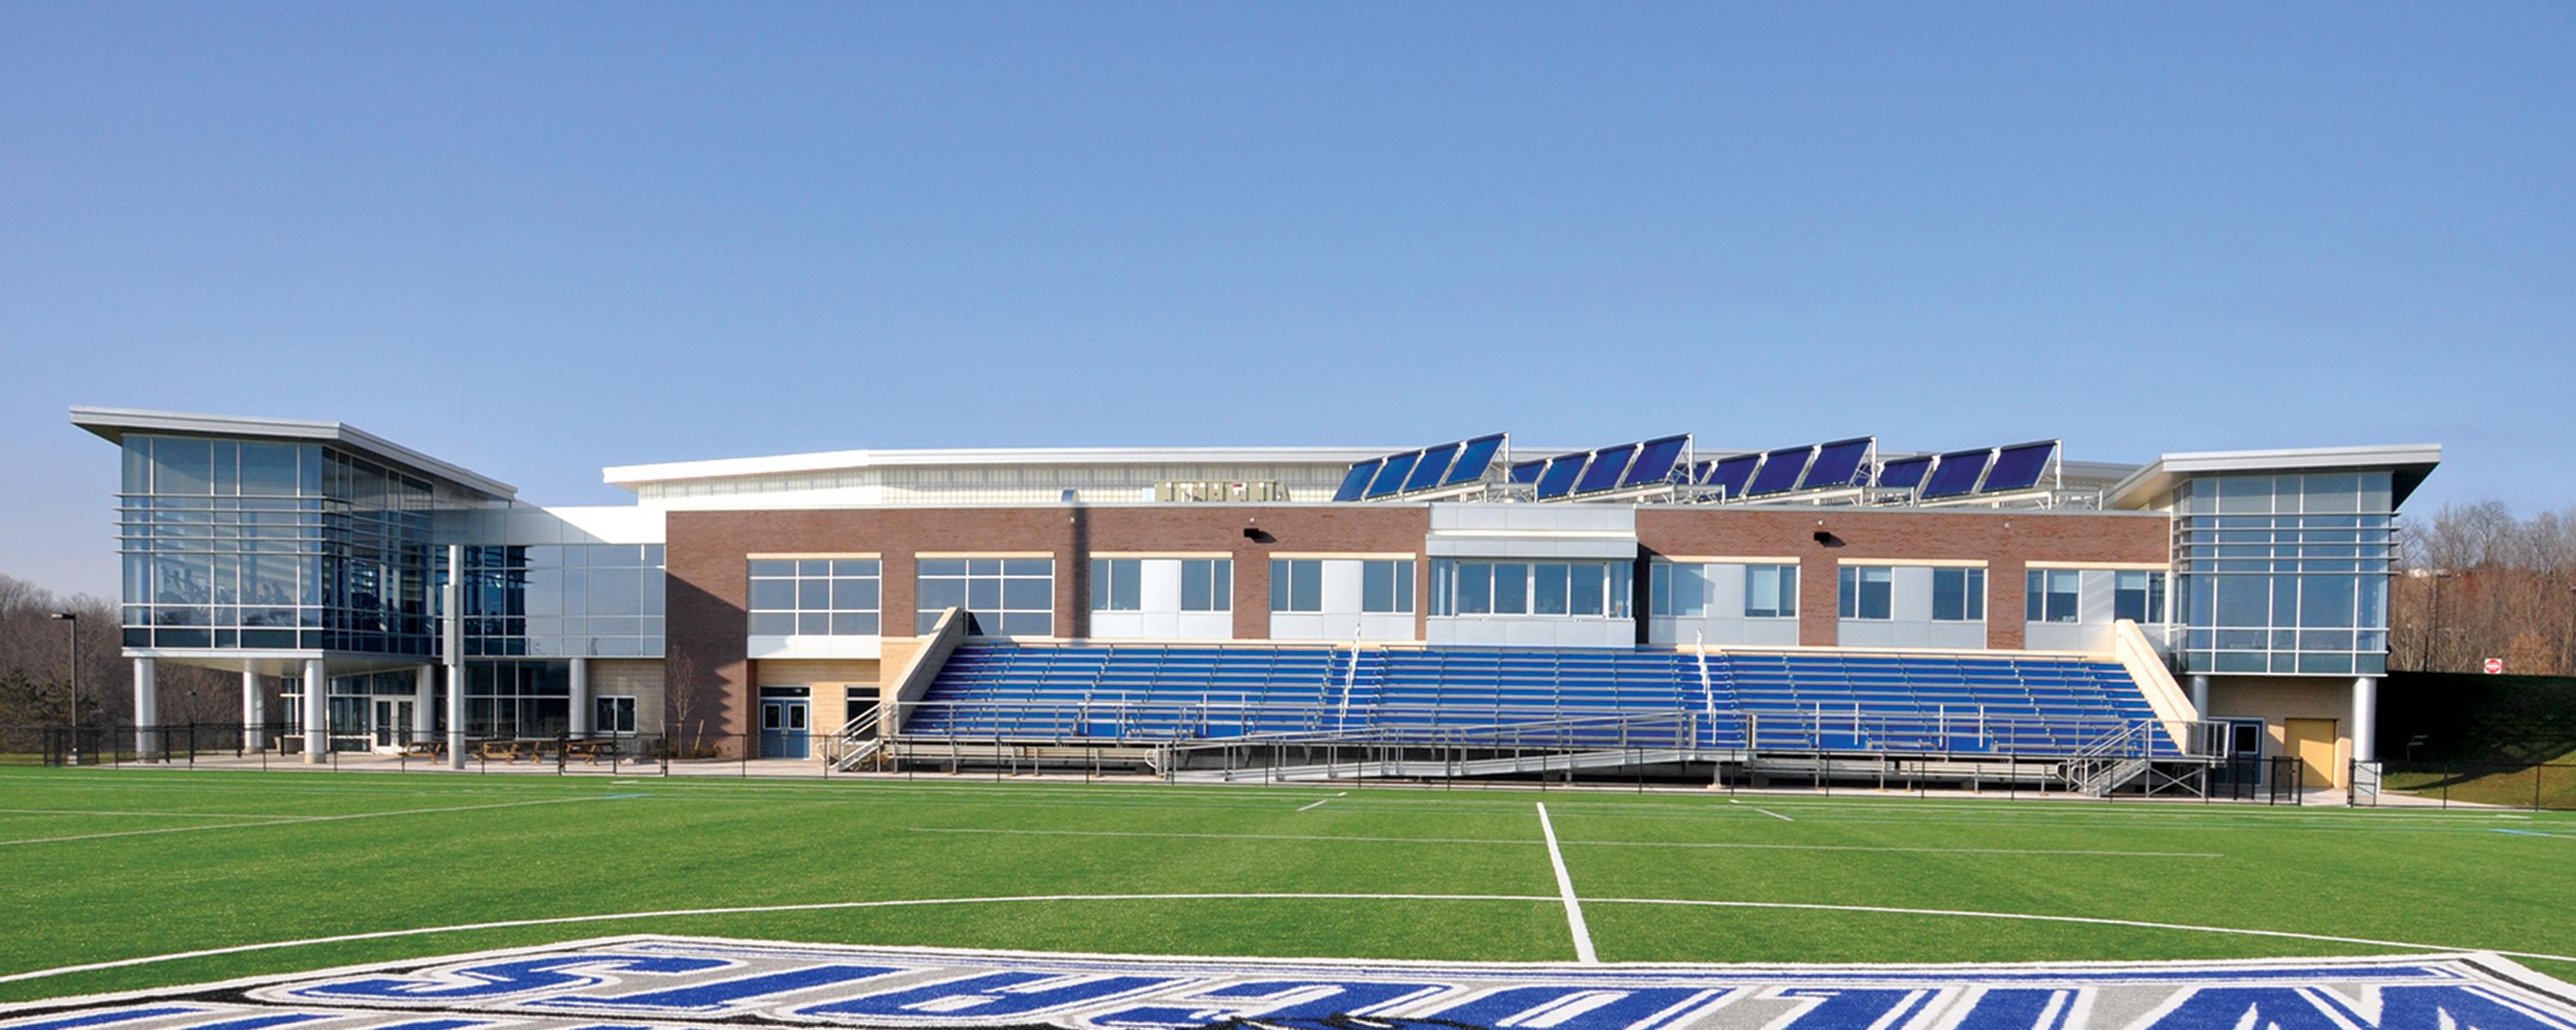 image of Athletic Facilities at SUNY Poly Utica Campus 